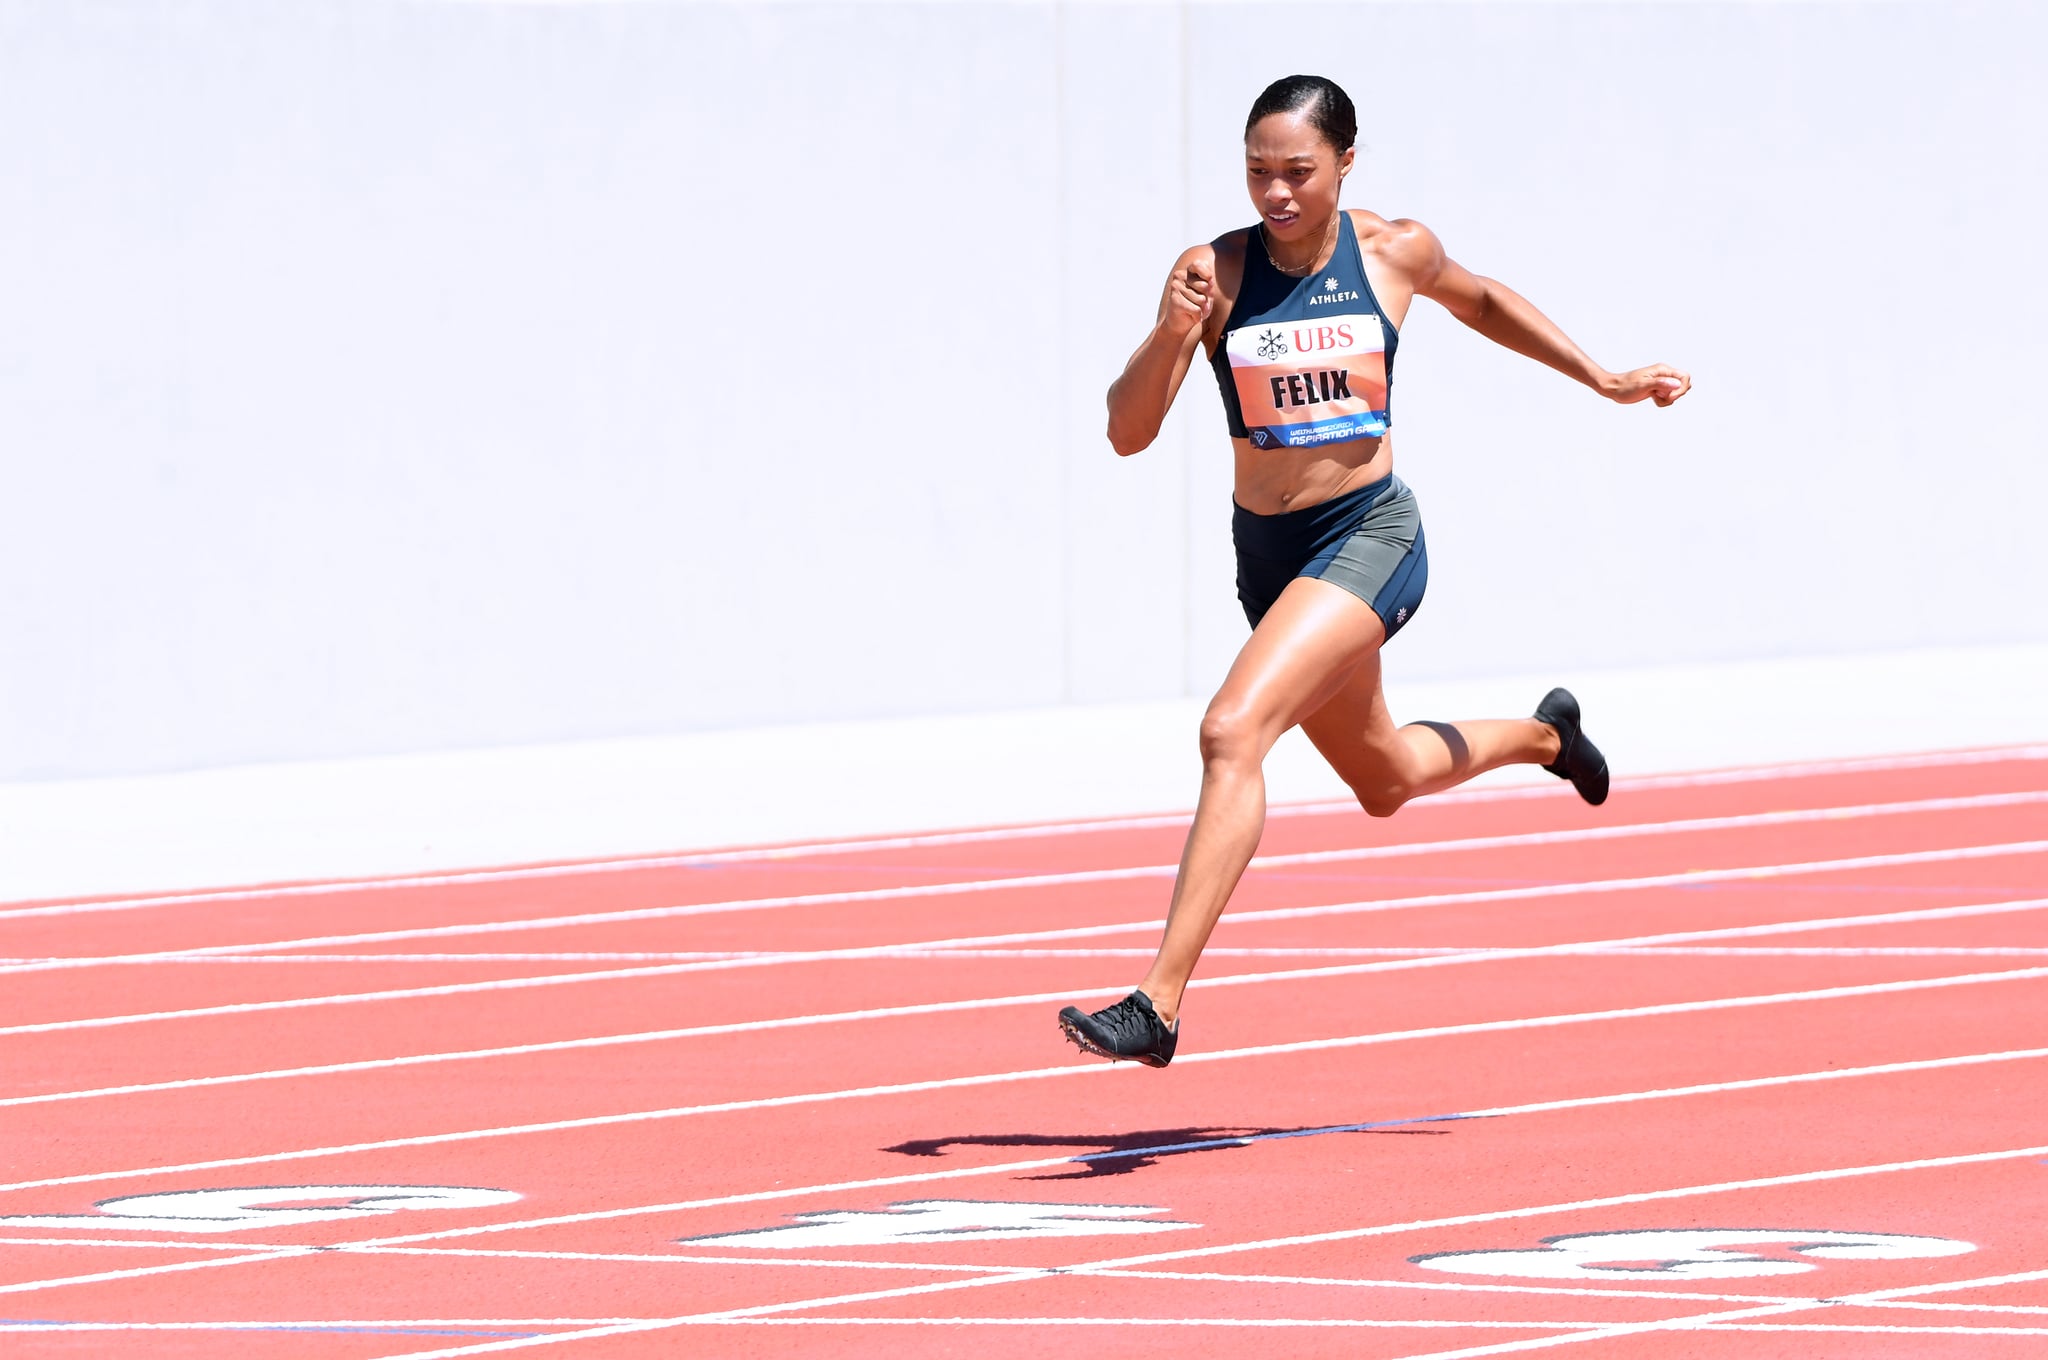 WALNUT, CA - JULY 09:  Allyson Felix crosses the finish in first place in the 150 meter dash during the Weltklasse Zurich Inspiration Games amidst the coronavirus (COVID-19) pandemic on July 09, 2020 in Walnut, California. (Photo by Harry How/Getty Images)